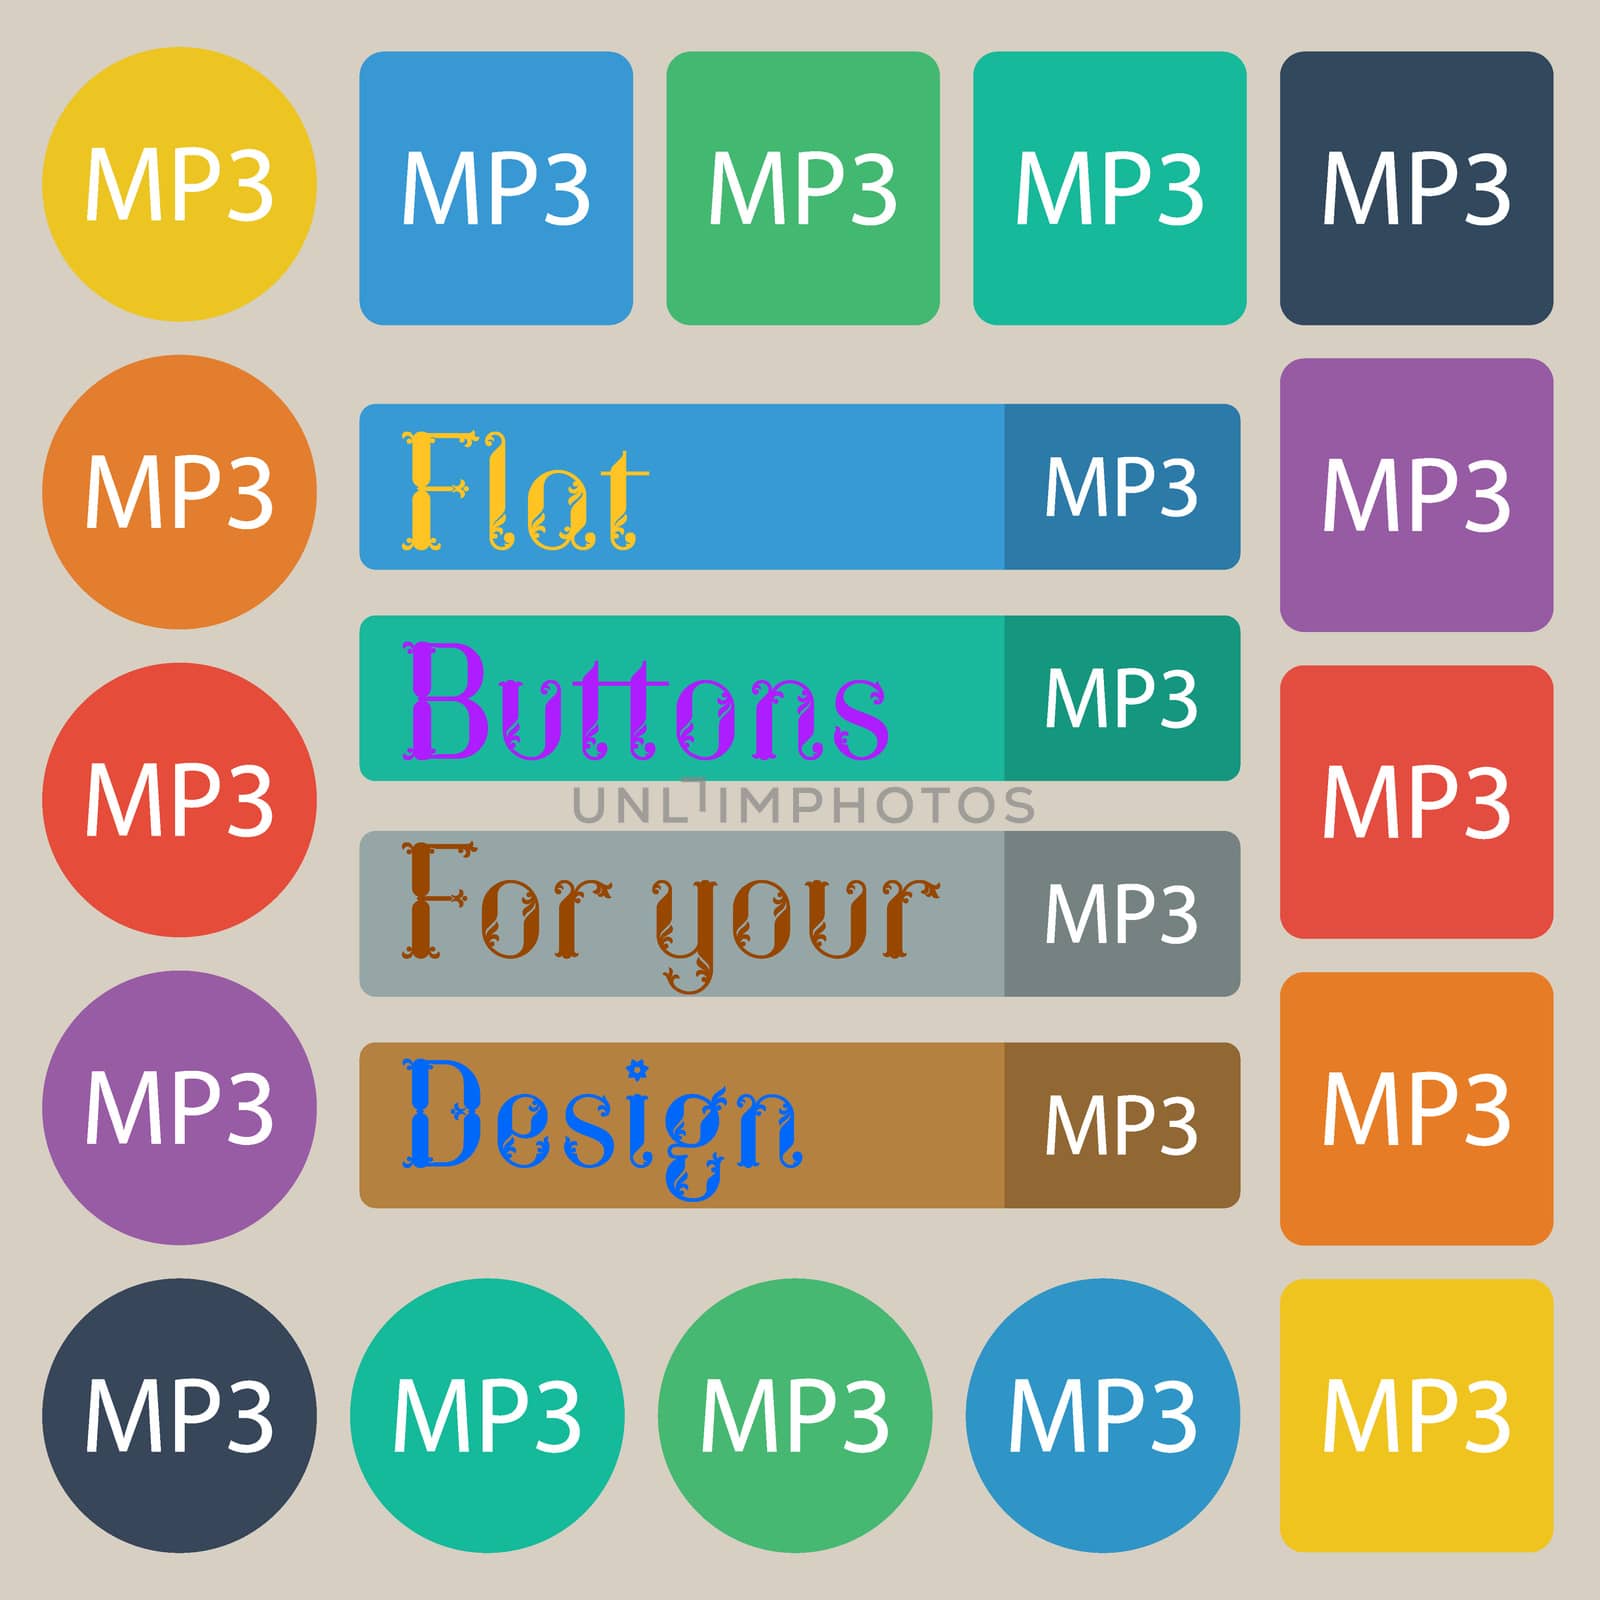 Mp3 music format sign icon. Musical symbol. Set of twenty colored flat, round, square and rectangular buttons. illustration